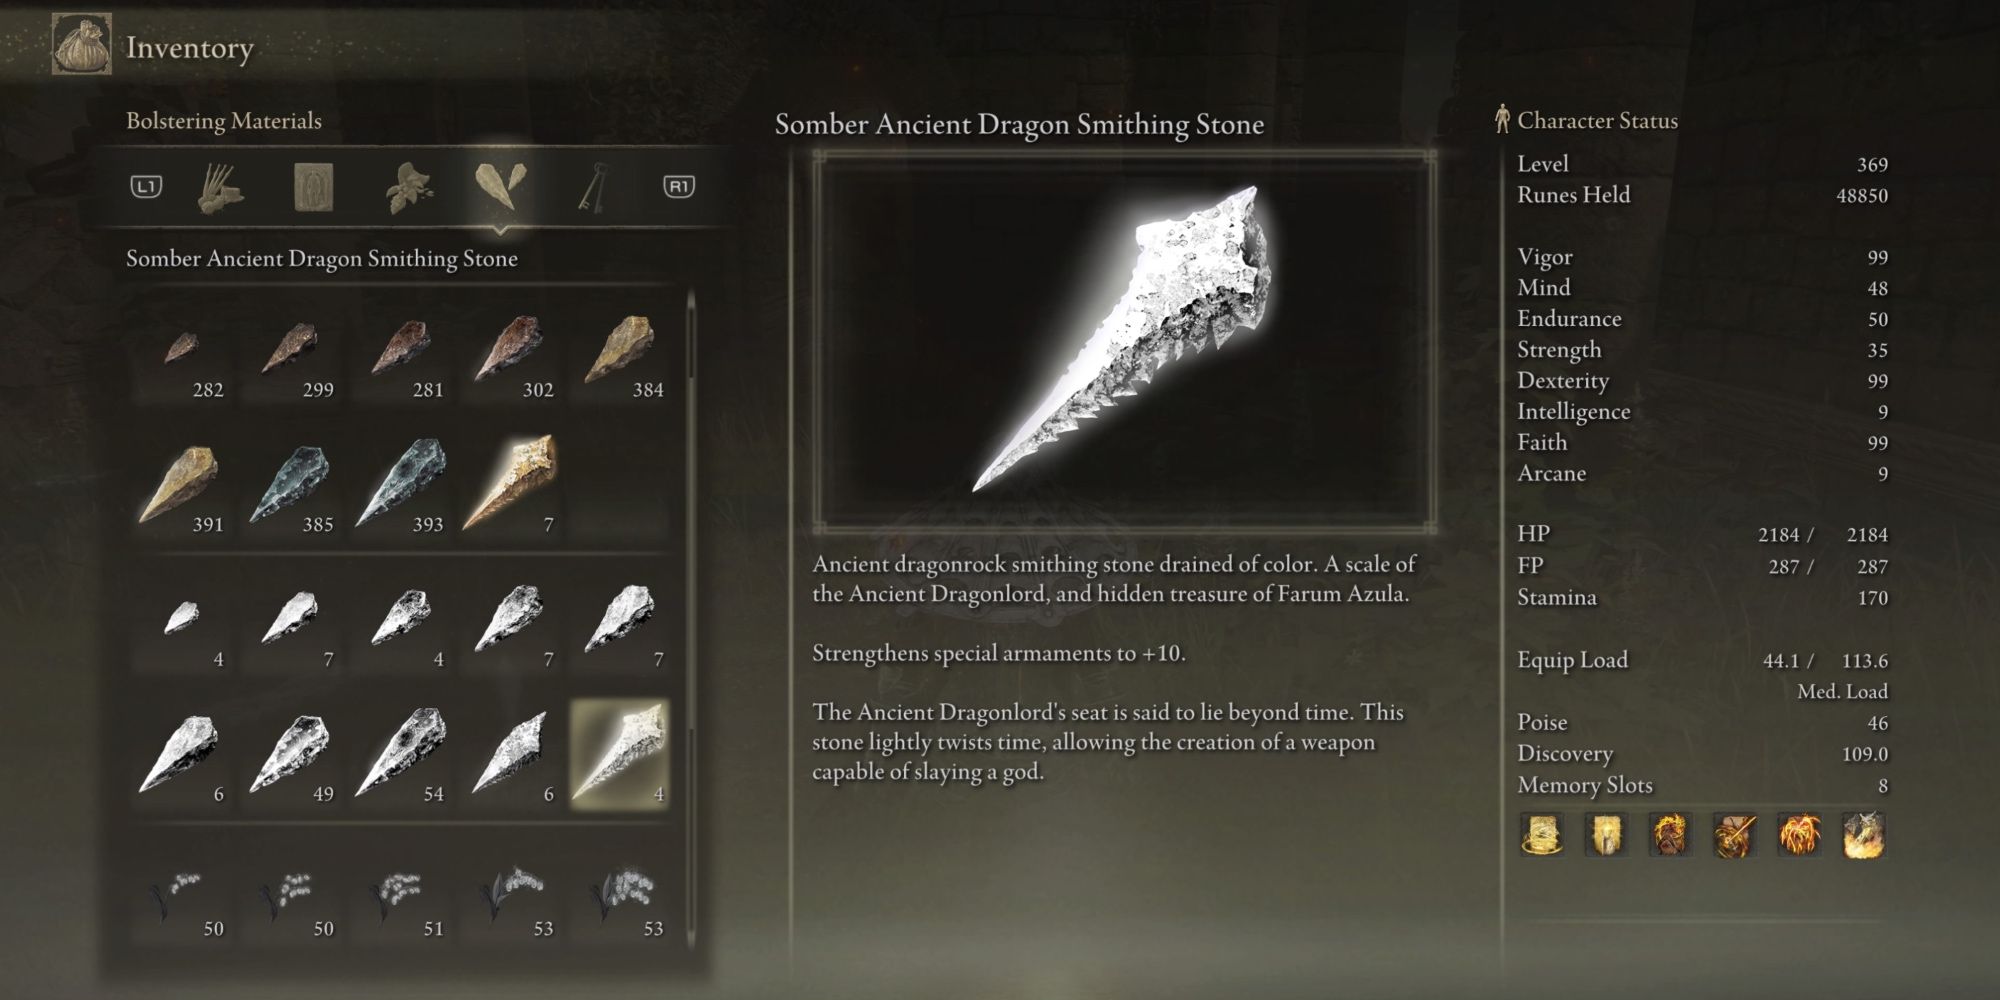 Somber Ancient Dragon Smithing Stone in Elden Ring.